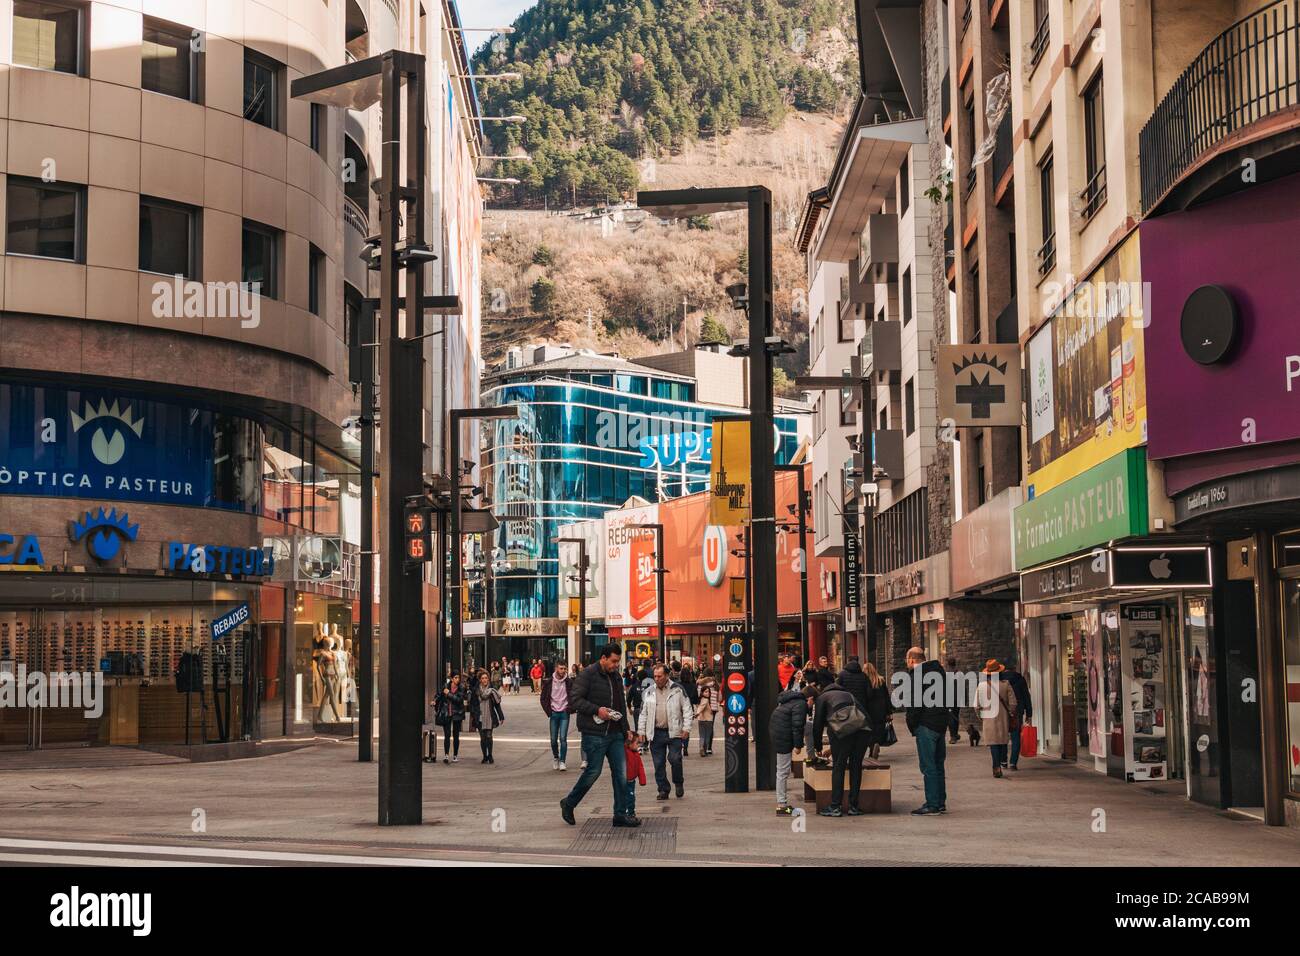 Vella Shopping Andorra High Resolution Stock Photography and Images - Alamy